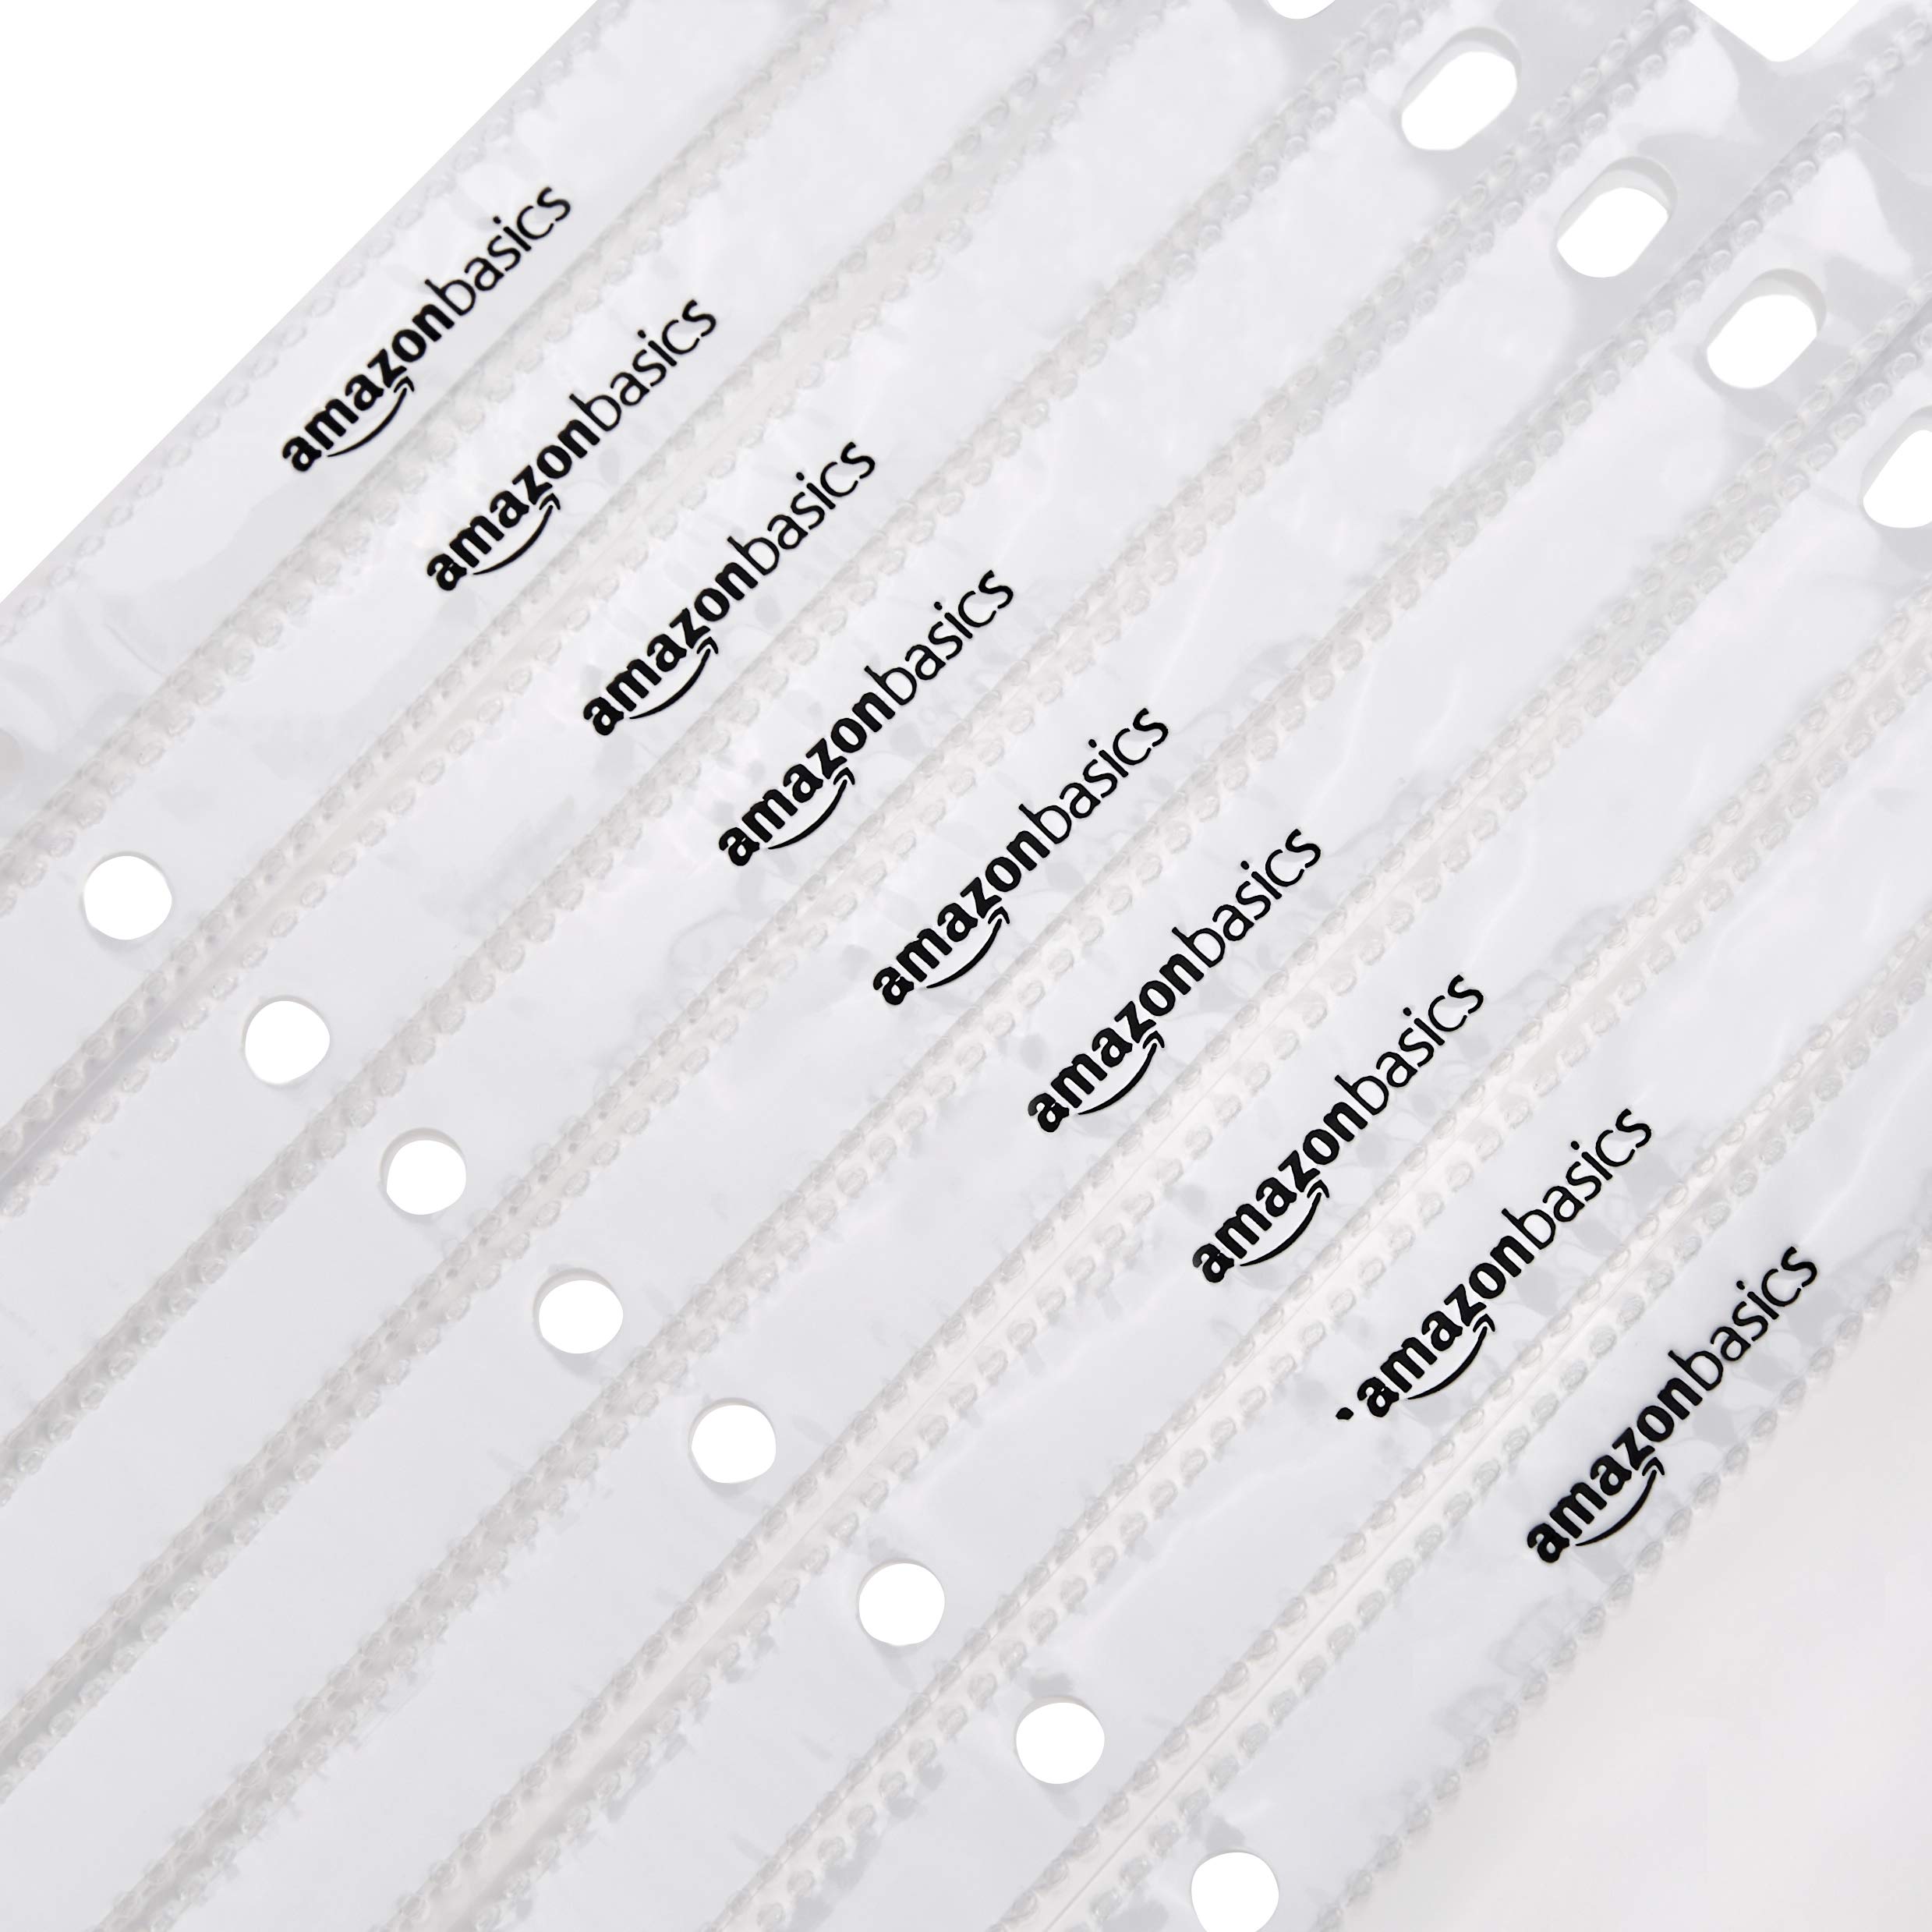 Amazon Basics Clear Sheet Protectors for 3 Ring Binder,Polypropylene, 8.5 x 11 Inch, 200-Pack